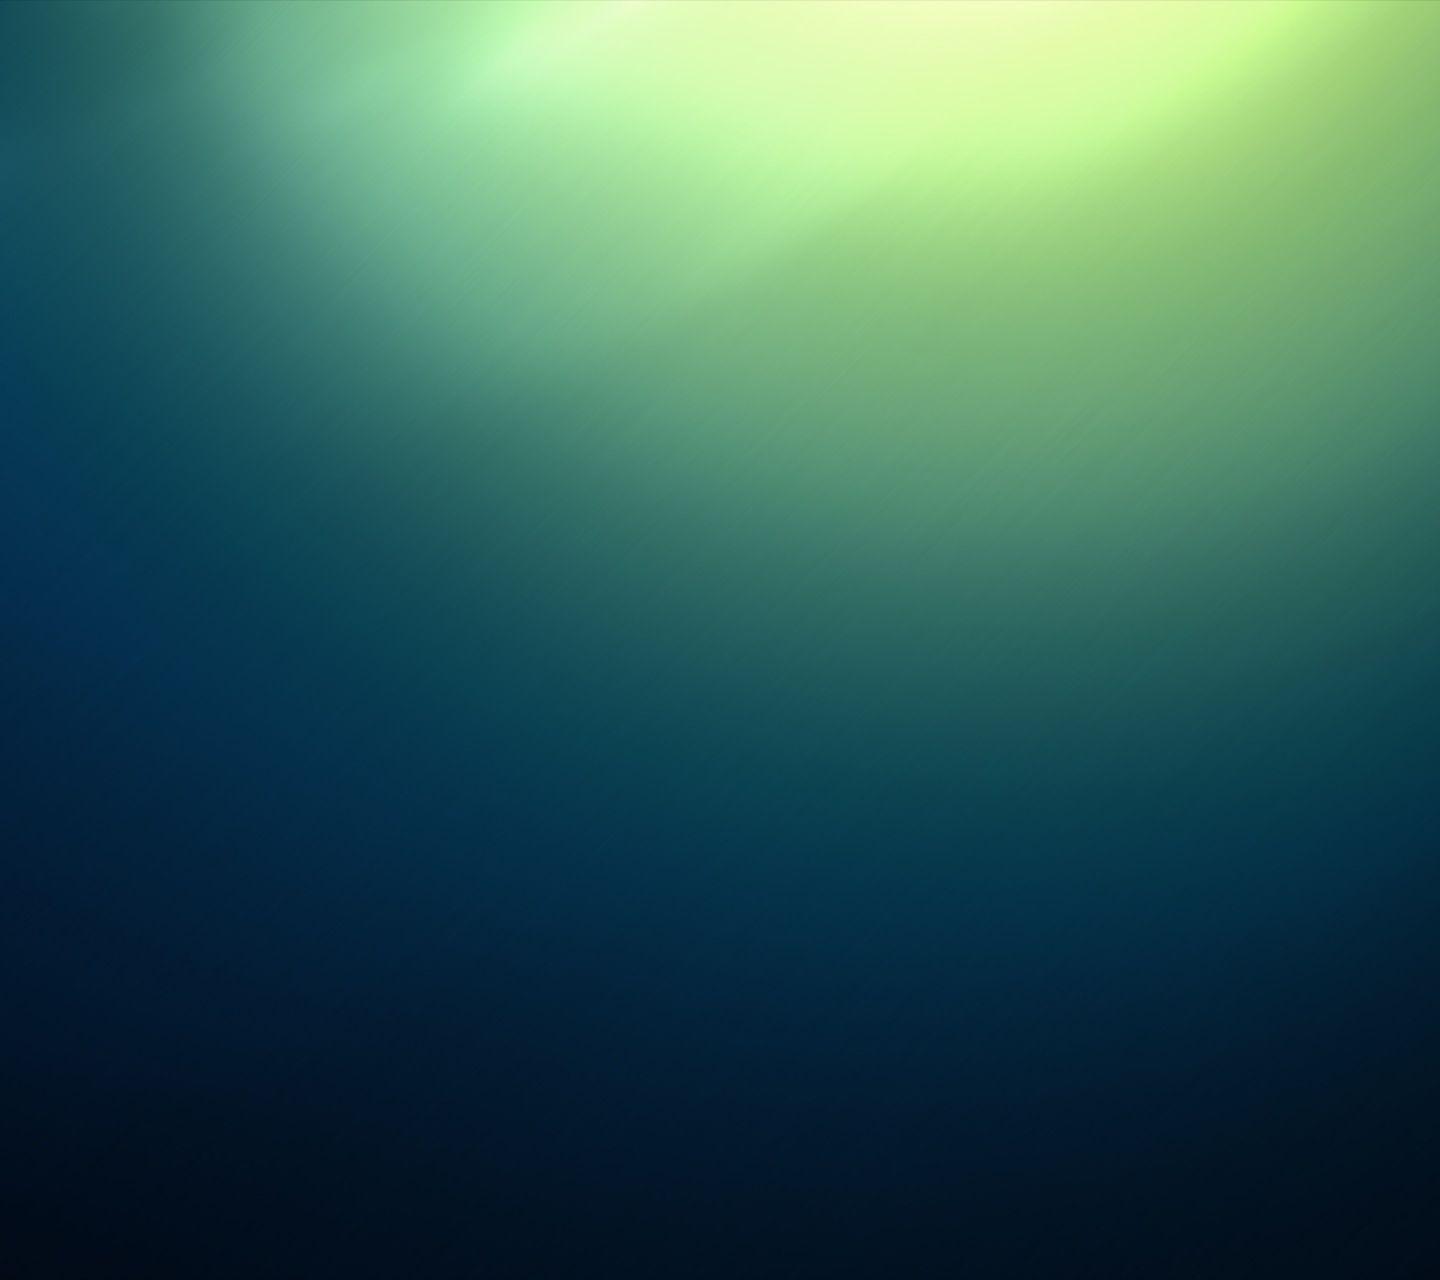 Android 4.1 Jelly Bean Stock Wallpaper 05 - [1440 x 1280]